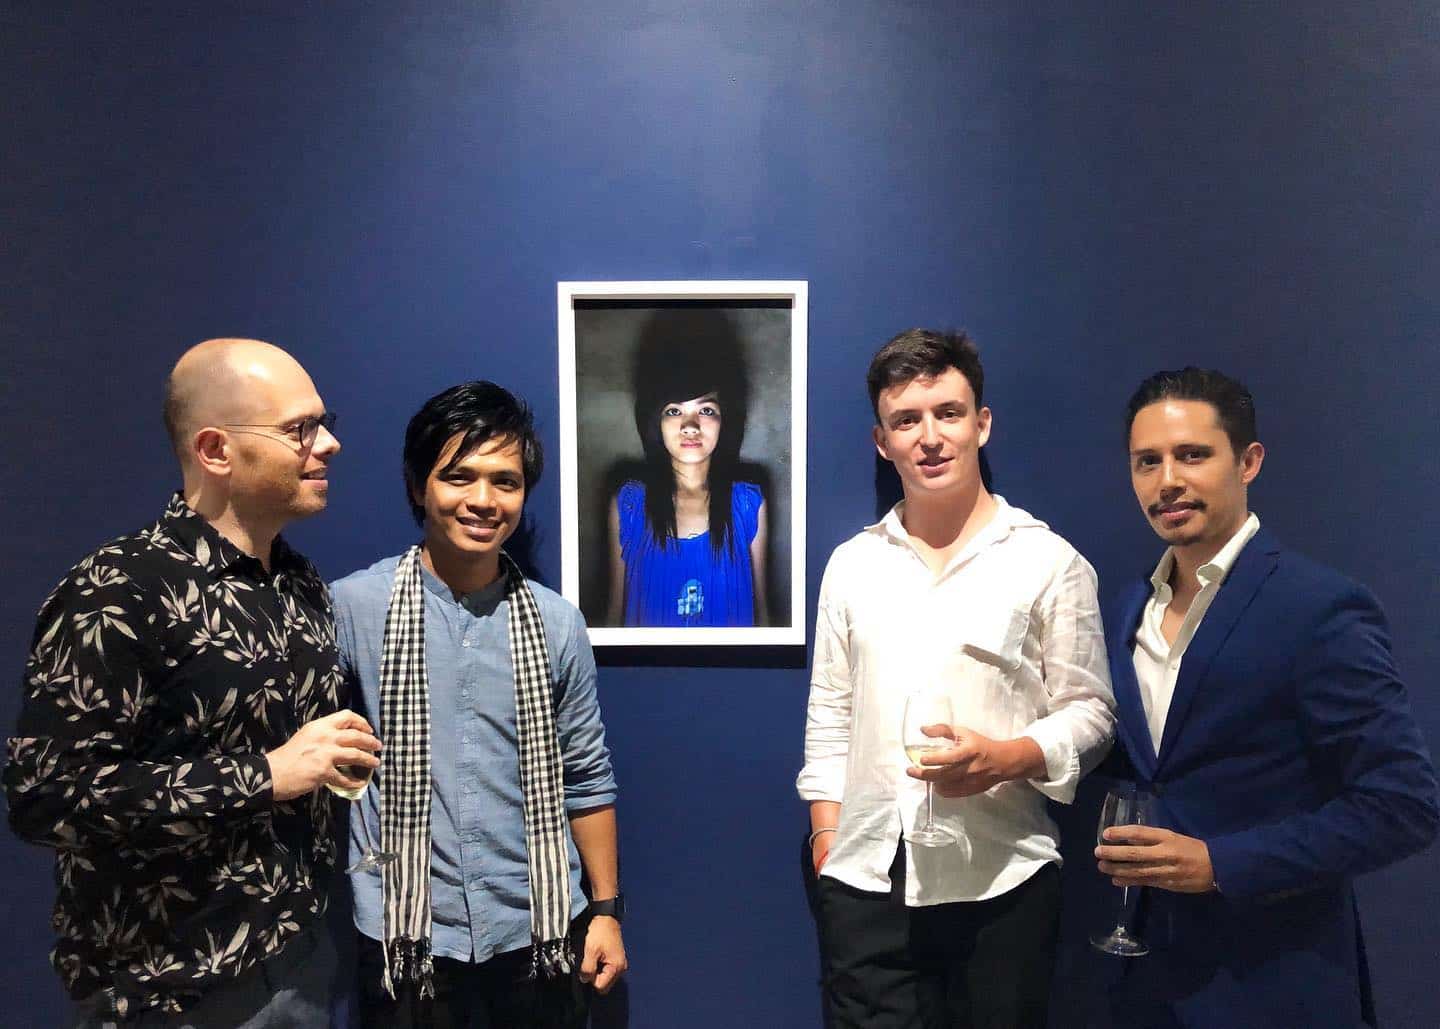 Batia Sarem owners Lyvann Loeuk and Yves Zlotowski with artist Sovan Philong and gallery manager Martin Phéline.